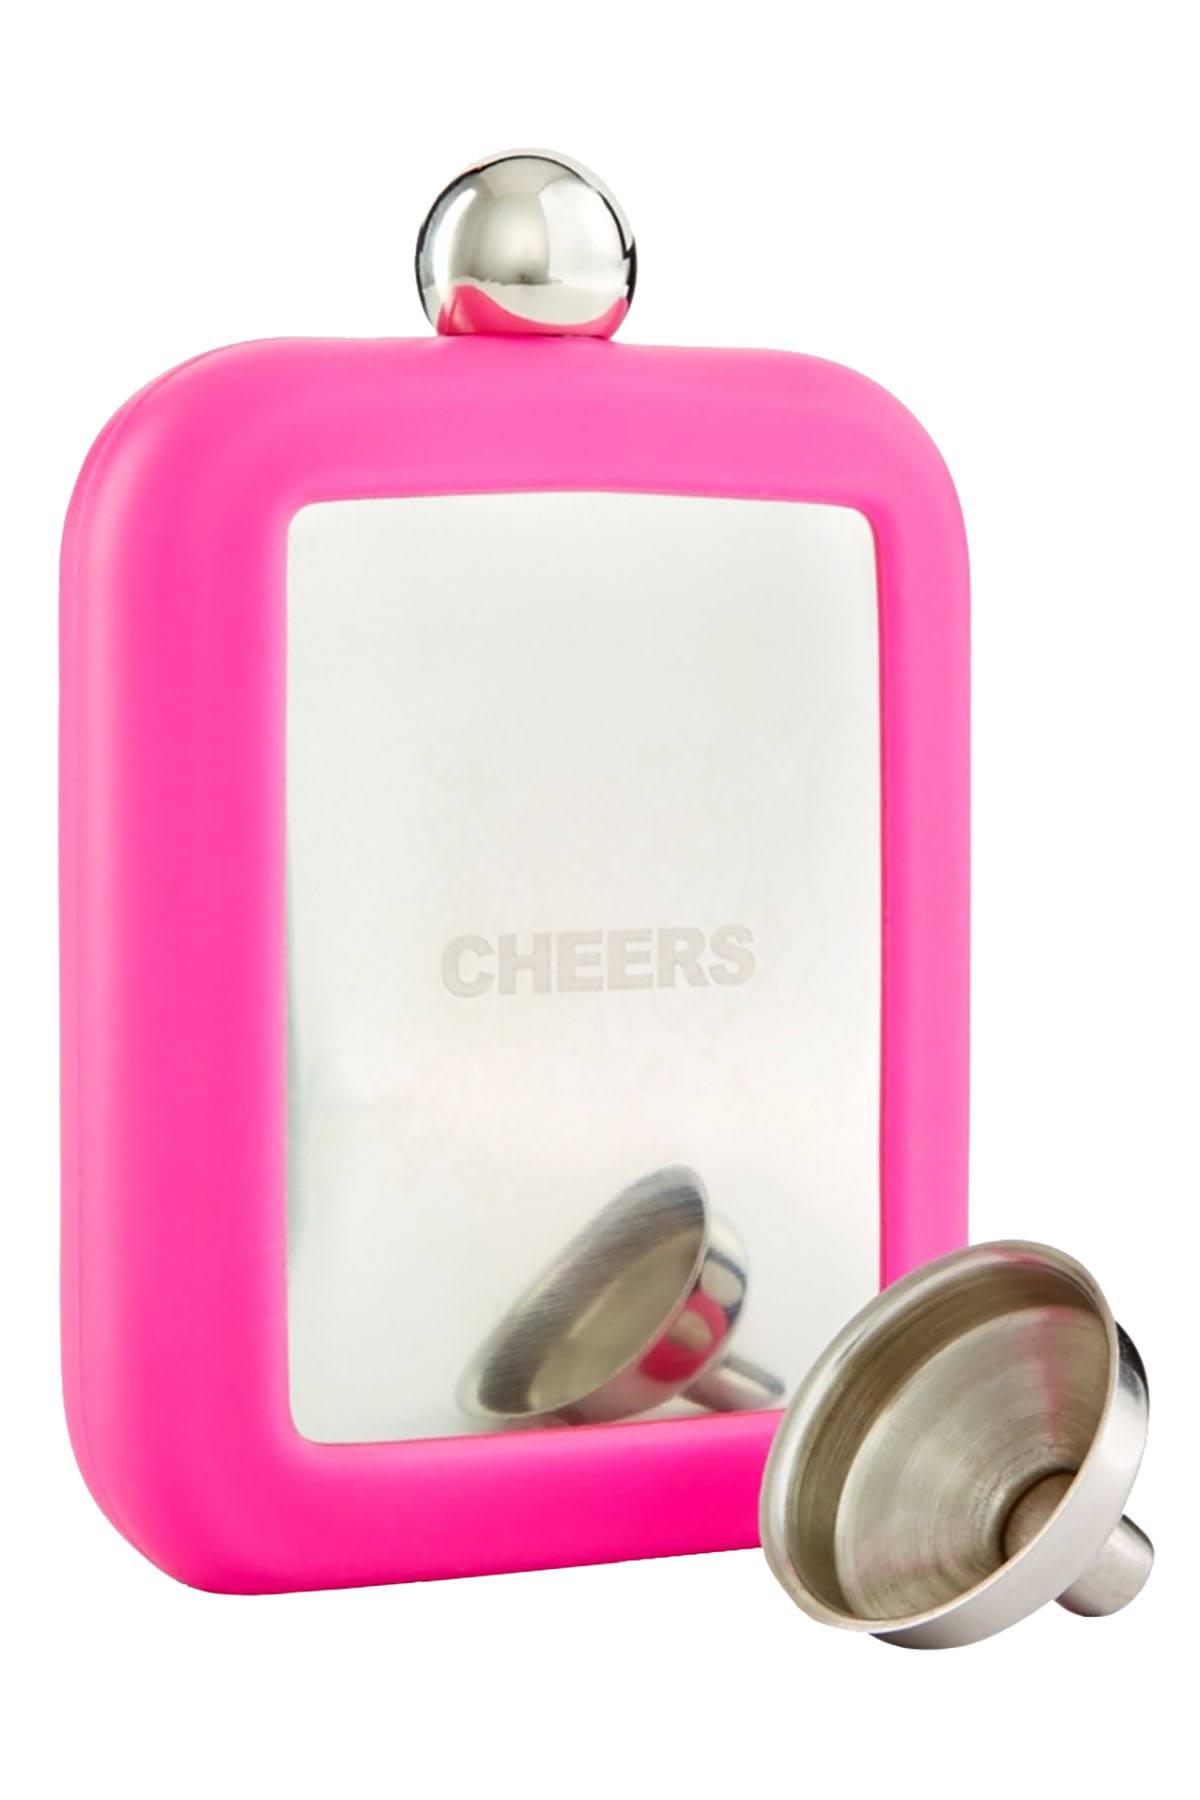 INC International Concepts Bright Pink CHEERS Stainless Steel Flask